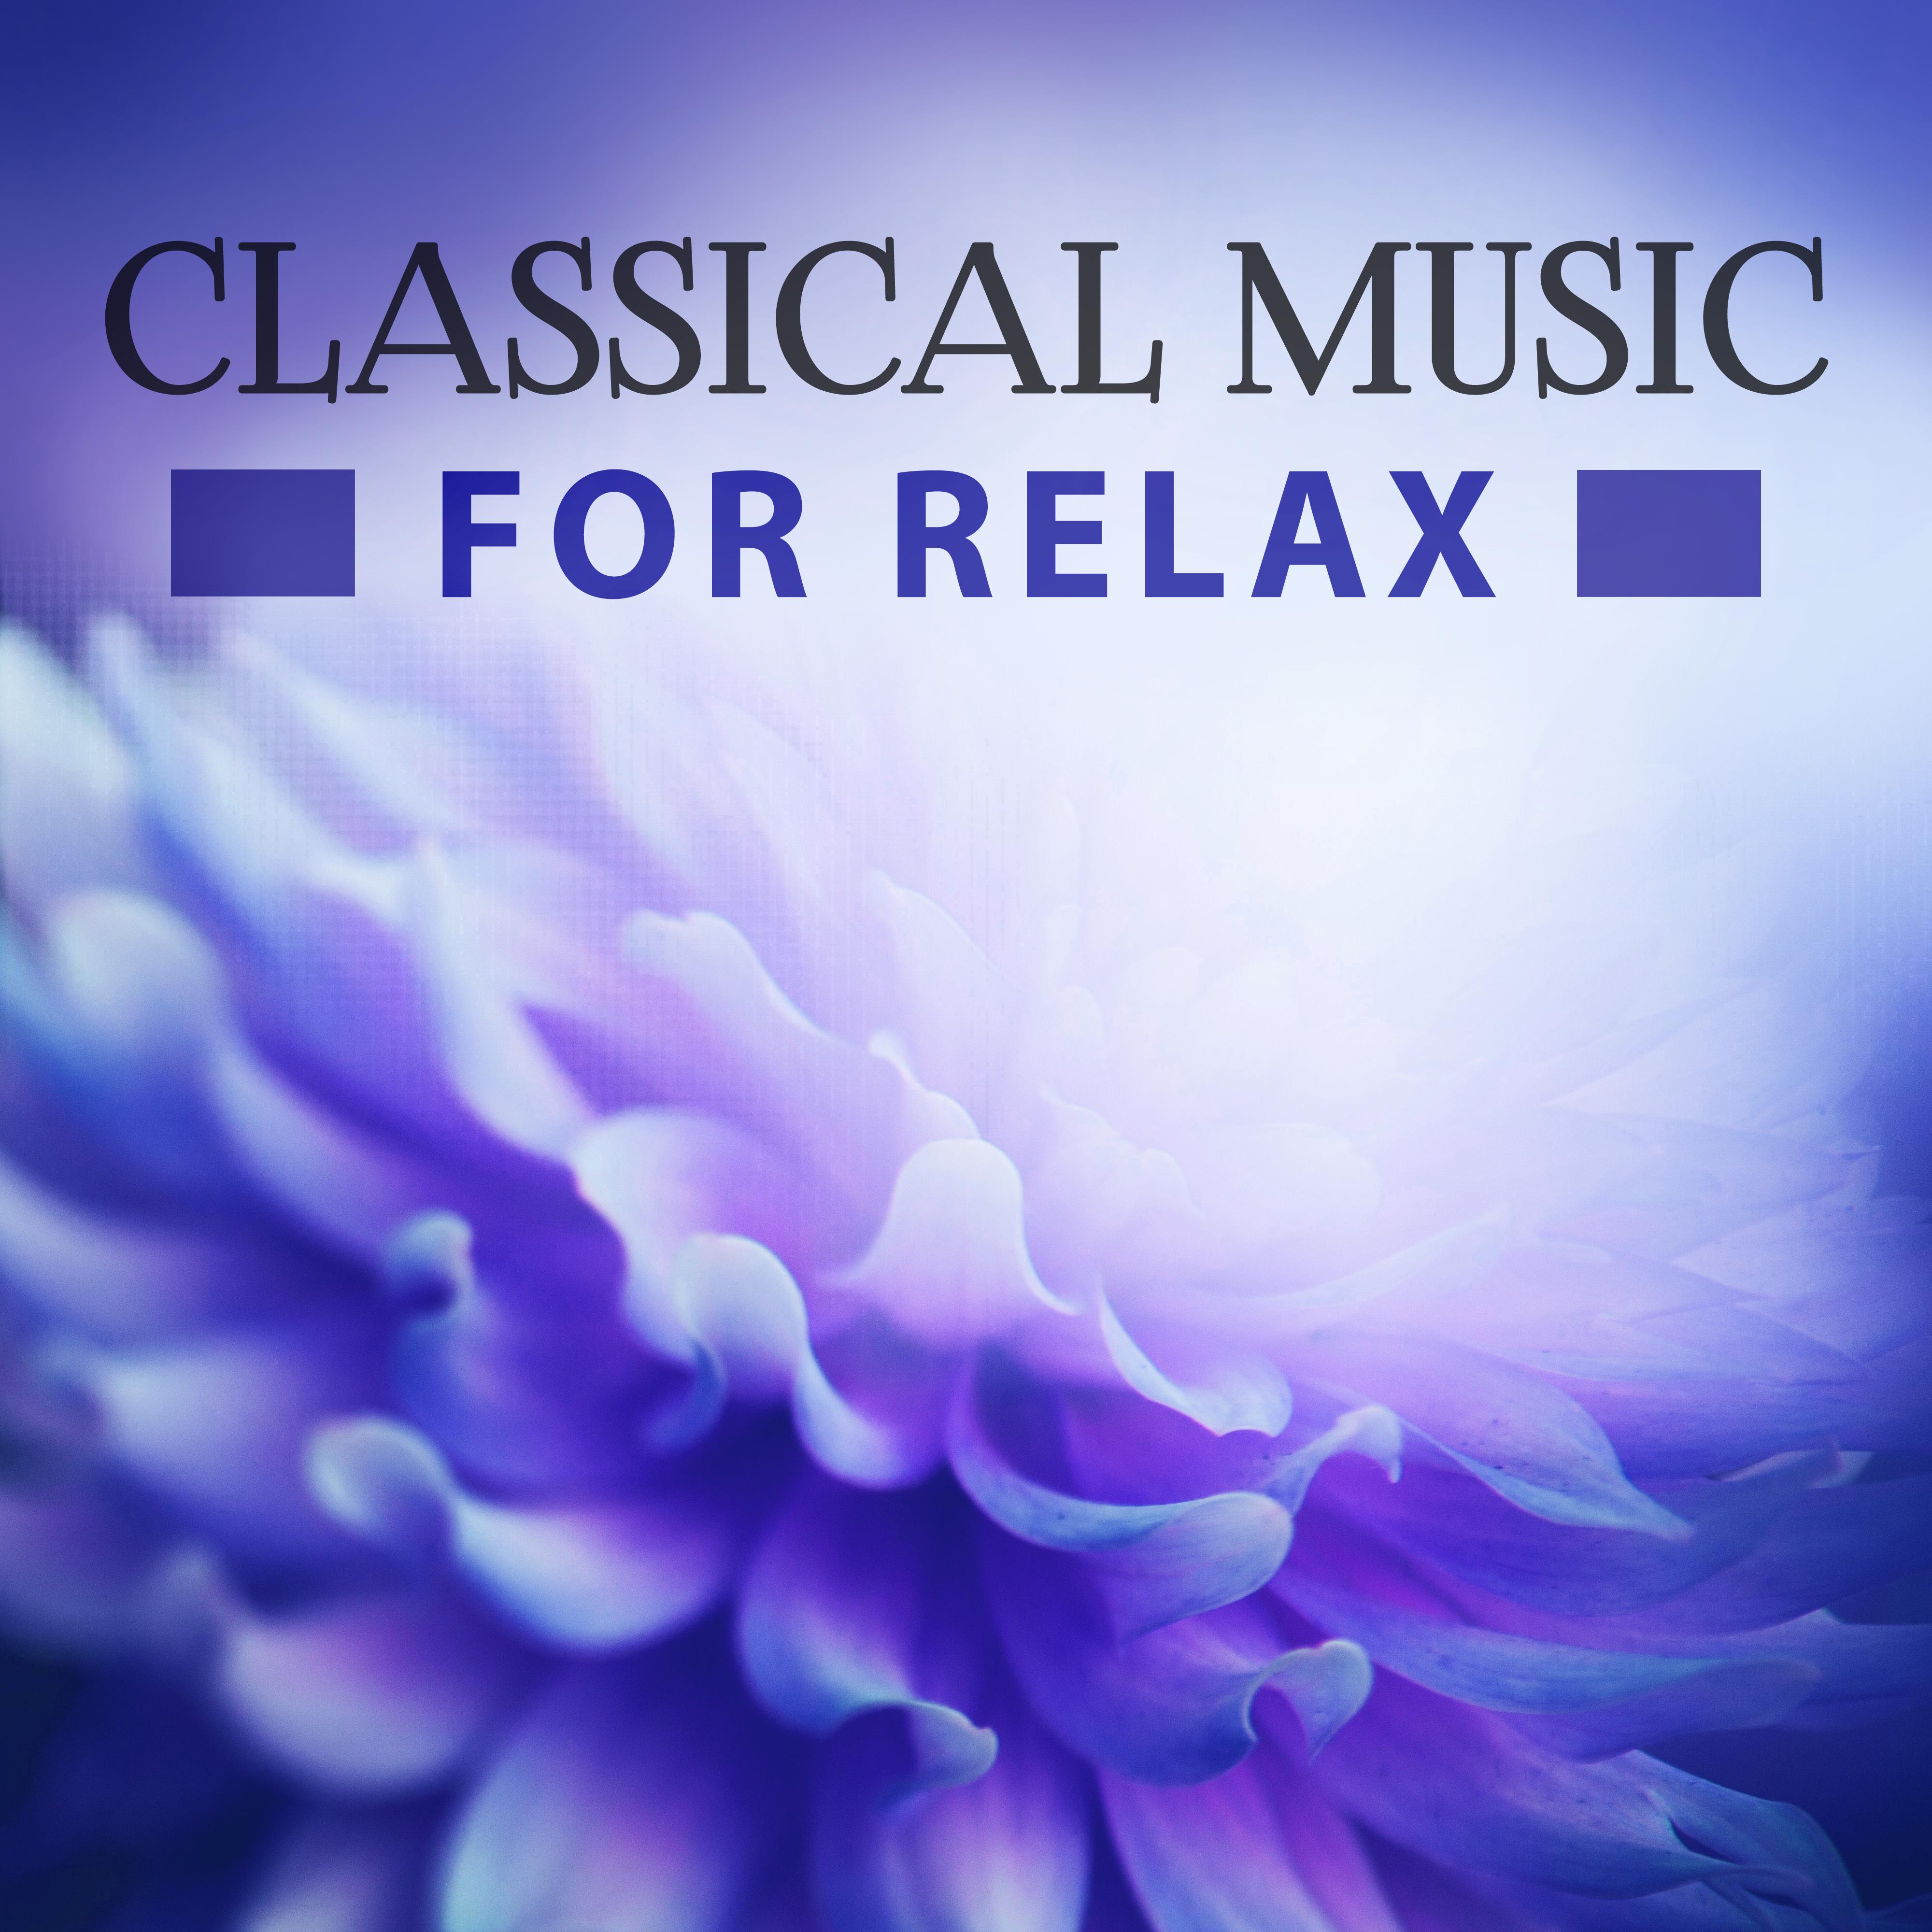 Classical Music for Relax – Relaxing Piano Sounds, Sleep, Ambient Instrumental Music, Chopin, Schubert, Mozart